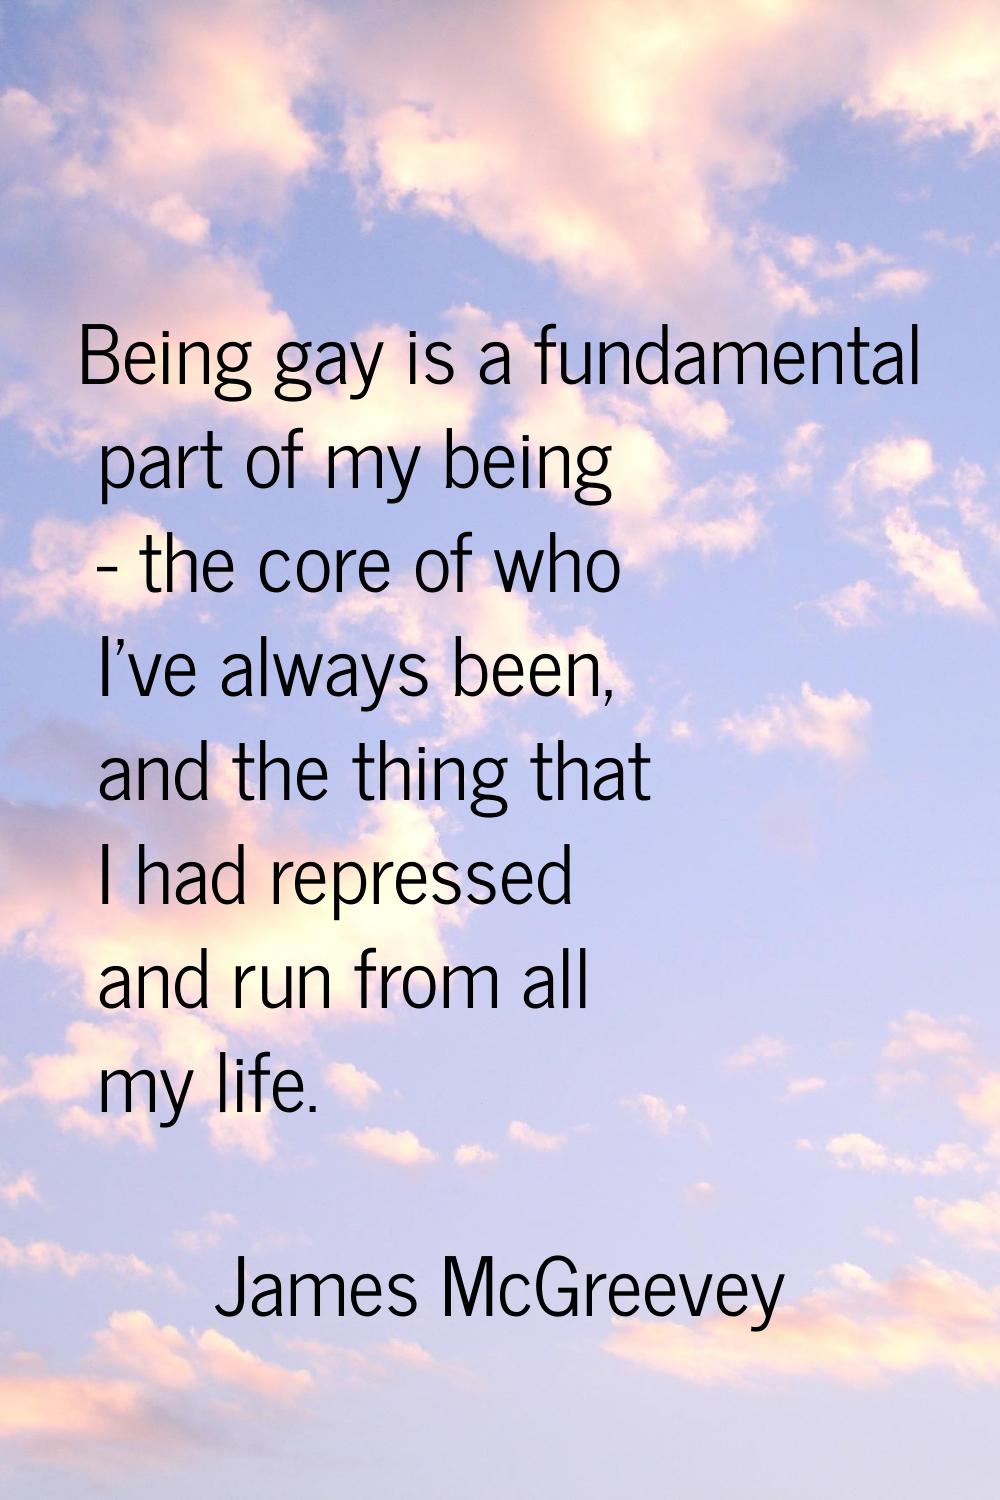 Being gay is a fundamental part of my being - the core of who I've always been, and the thing that 